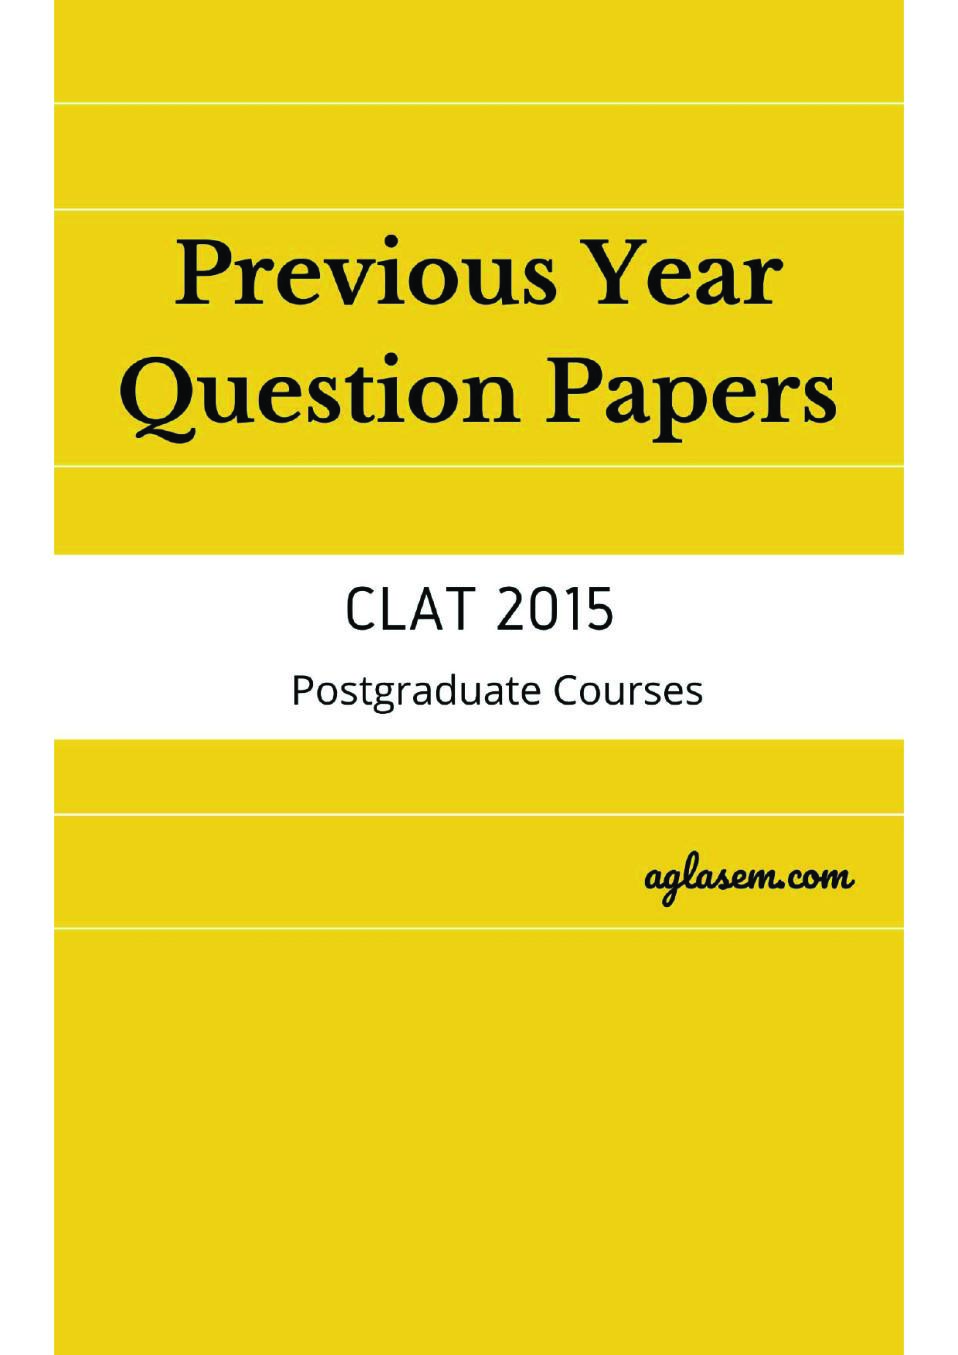 CLAT LLM 2015 Question Paper with Answers - Page 1